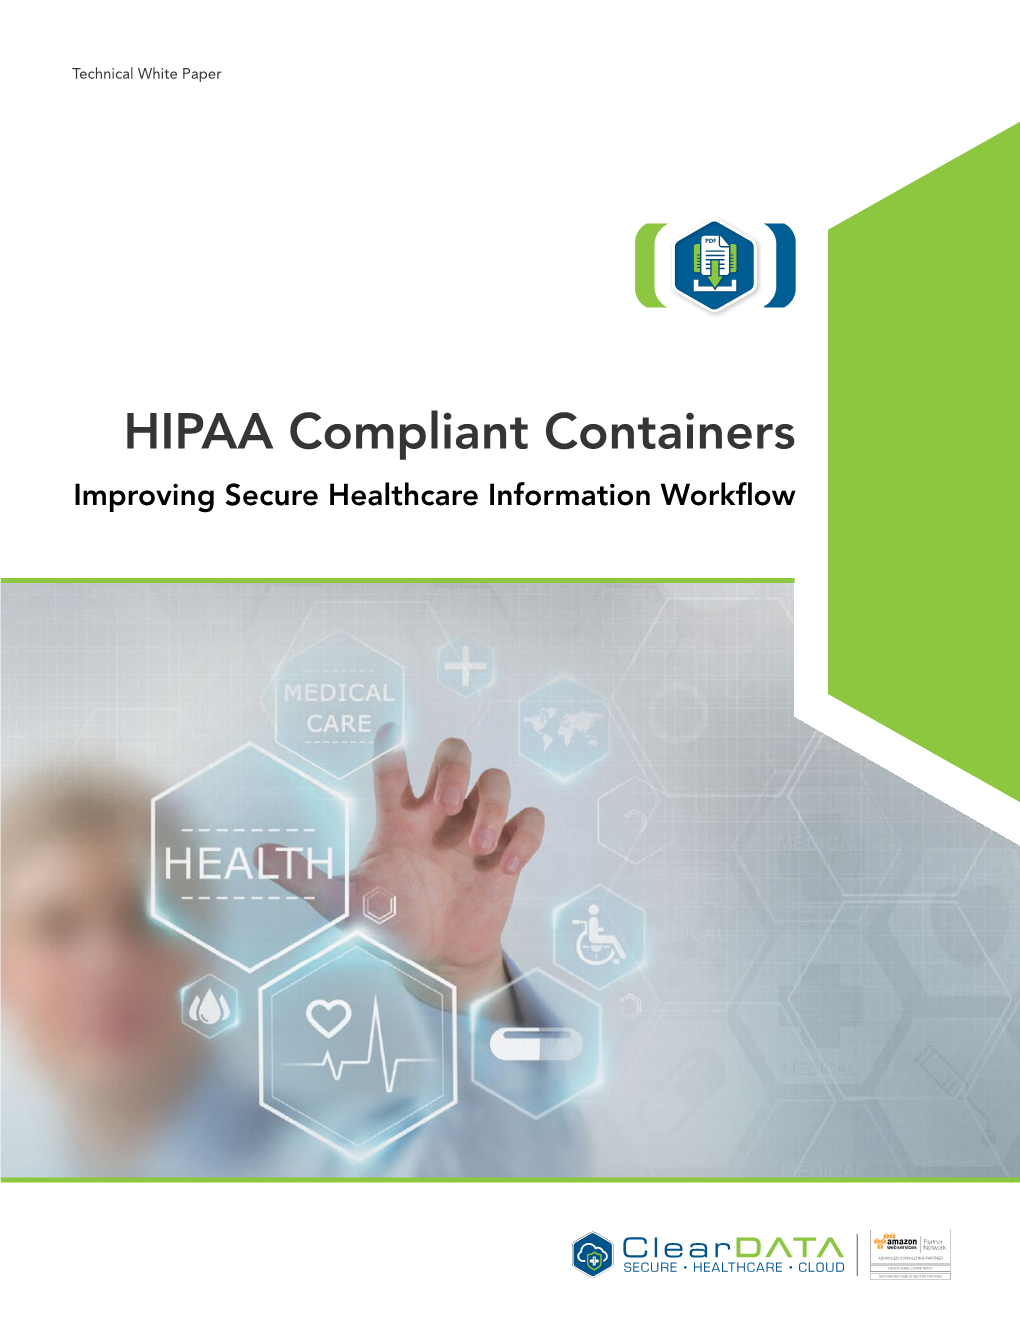 HIPAA Compliant Containers Improving Secure Healthcare Information Workflow